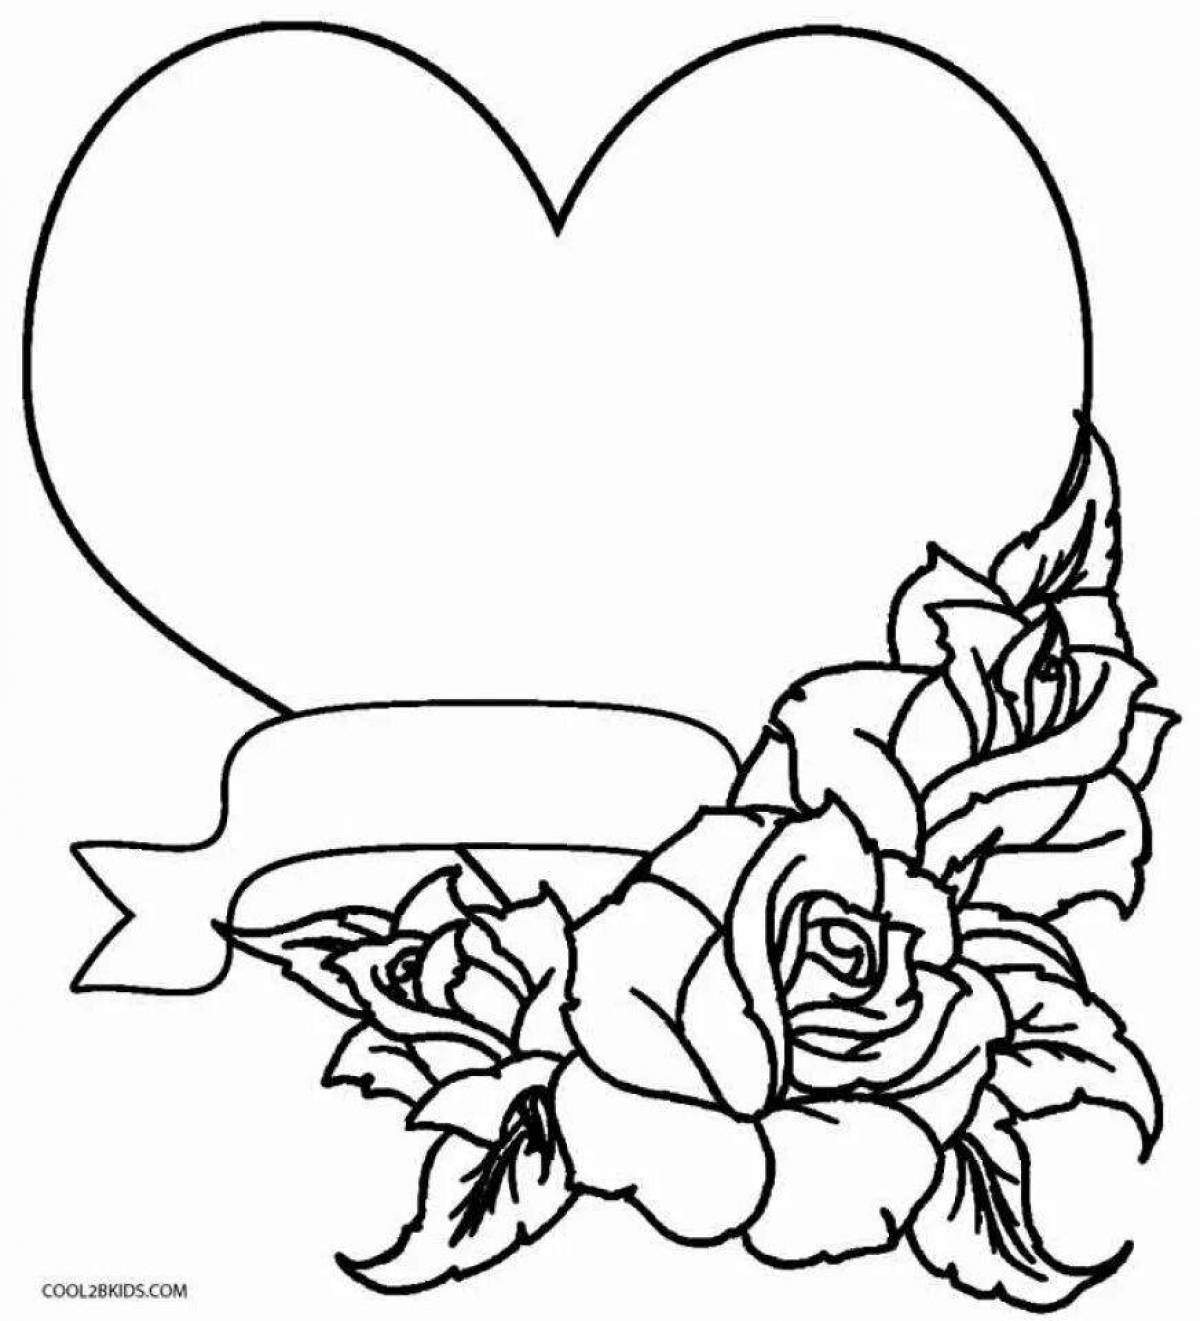 Colorful happy birthday rose coloring book